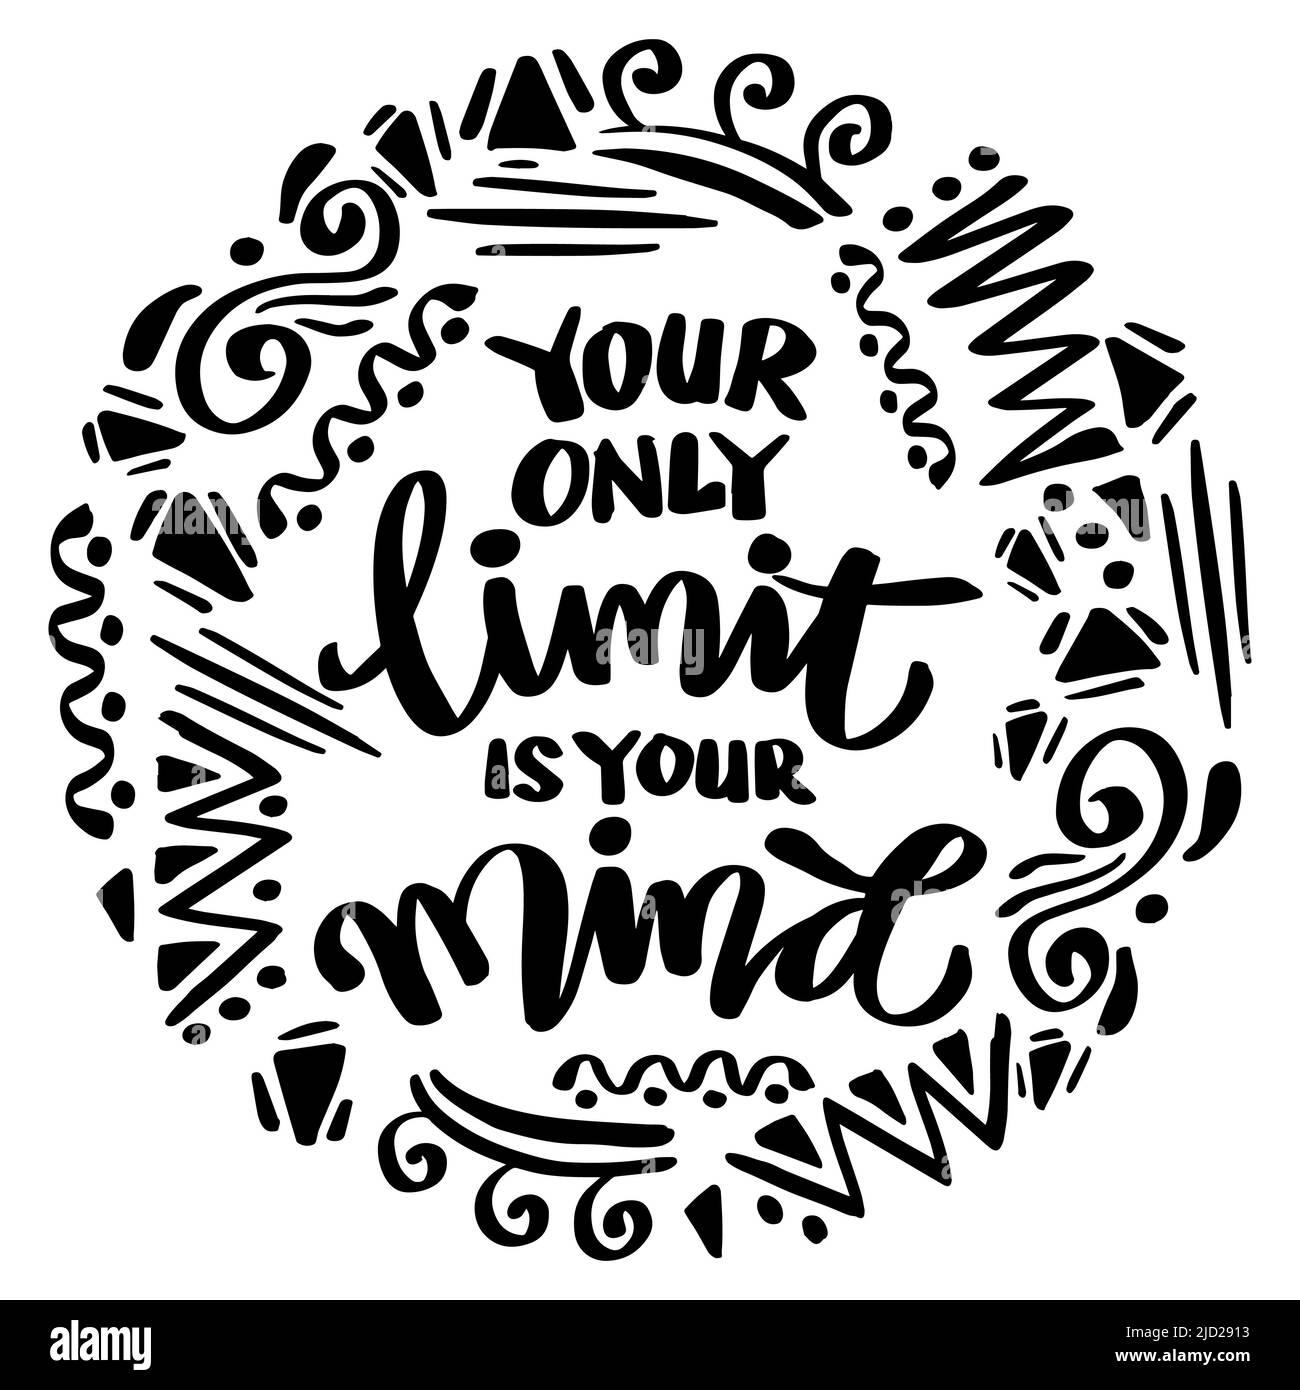 Your only limit is your mind. Poster quotes. Stock Photo